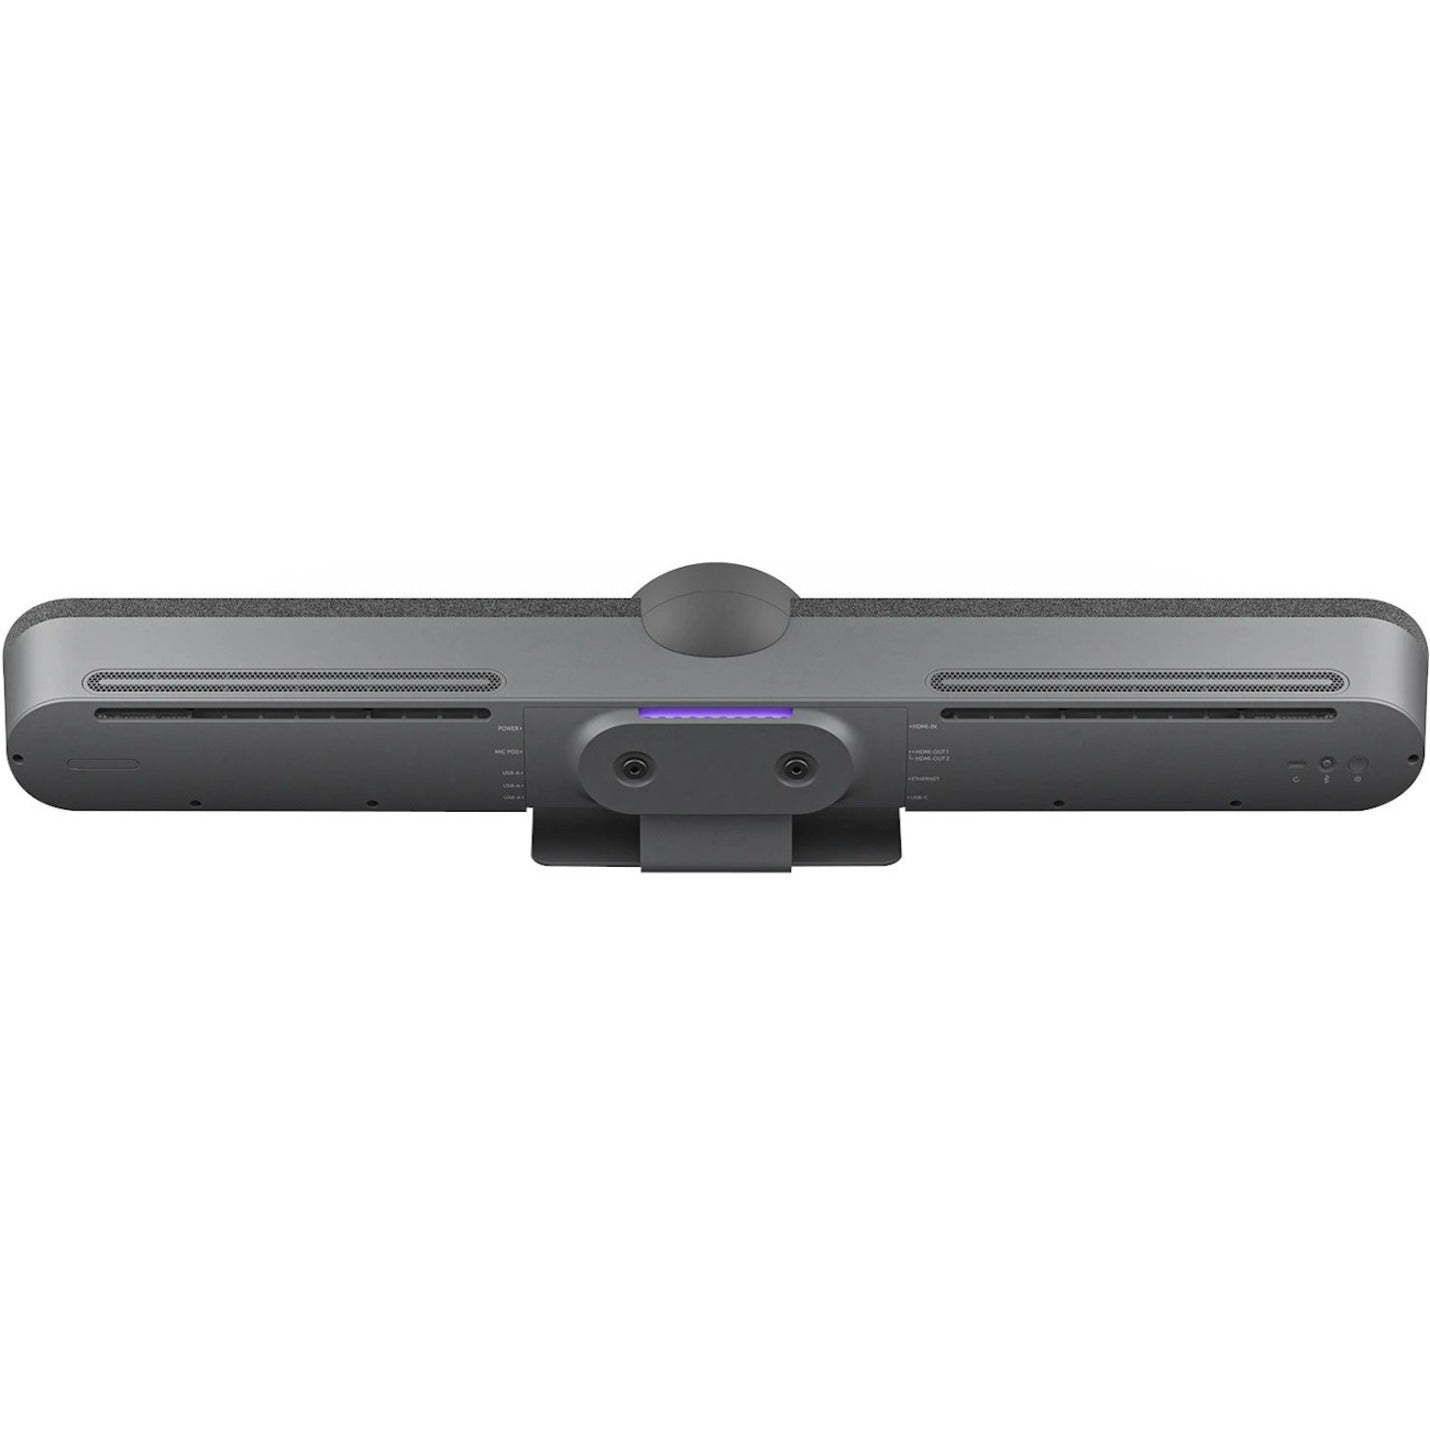 Logitech 960-001308 RALLY BAR Video Conferencing Camera, 30 fps, Graphite, USB 3.0